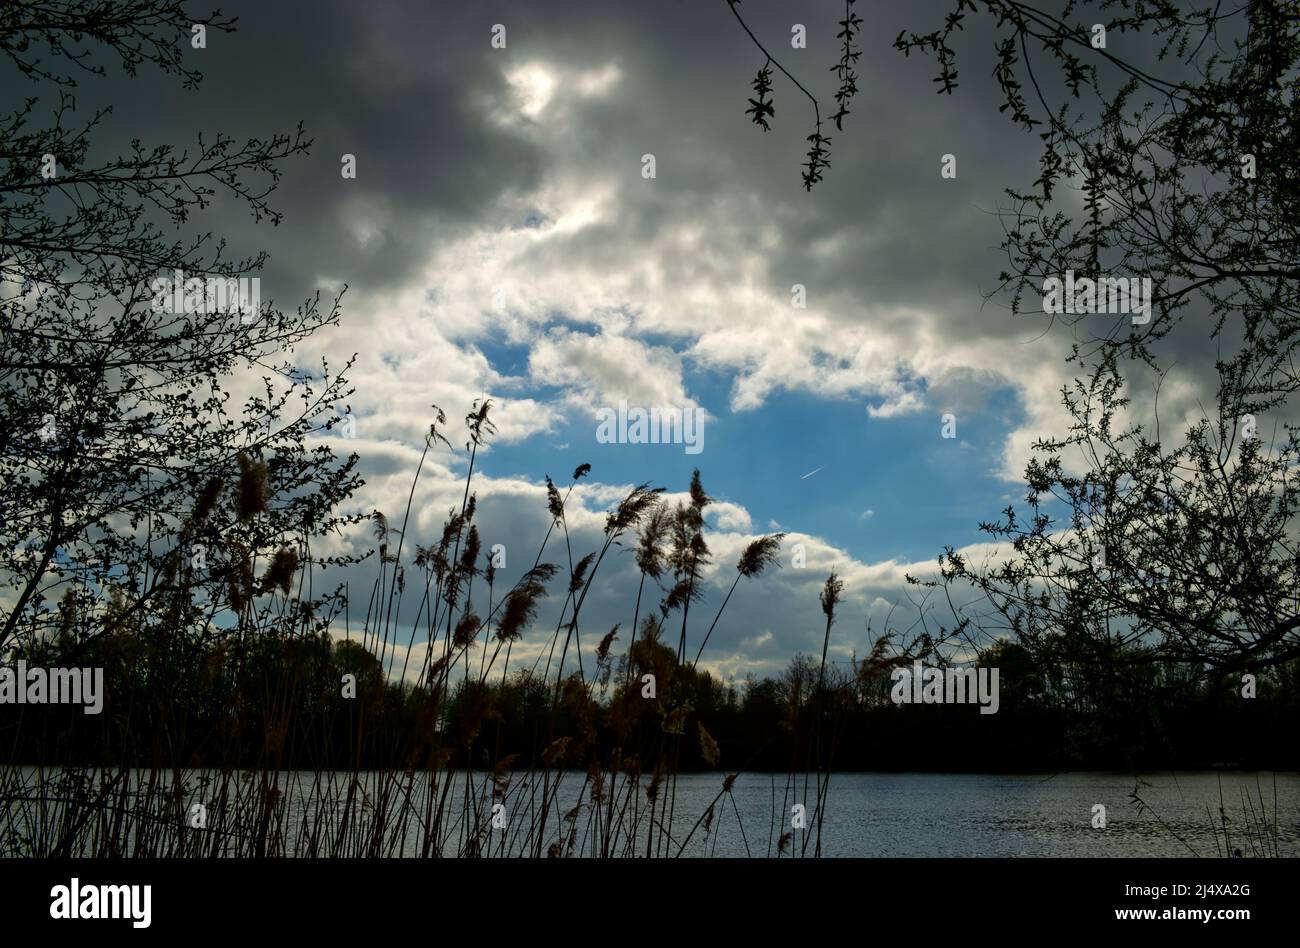 lakeside with reed and branches in a dark grey clouded sky with a luminous clear blue spot at its center Stock Photo